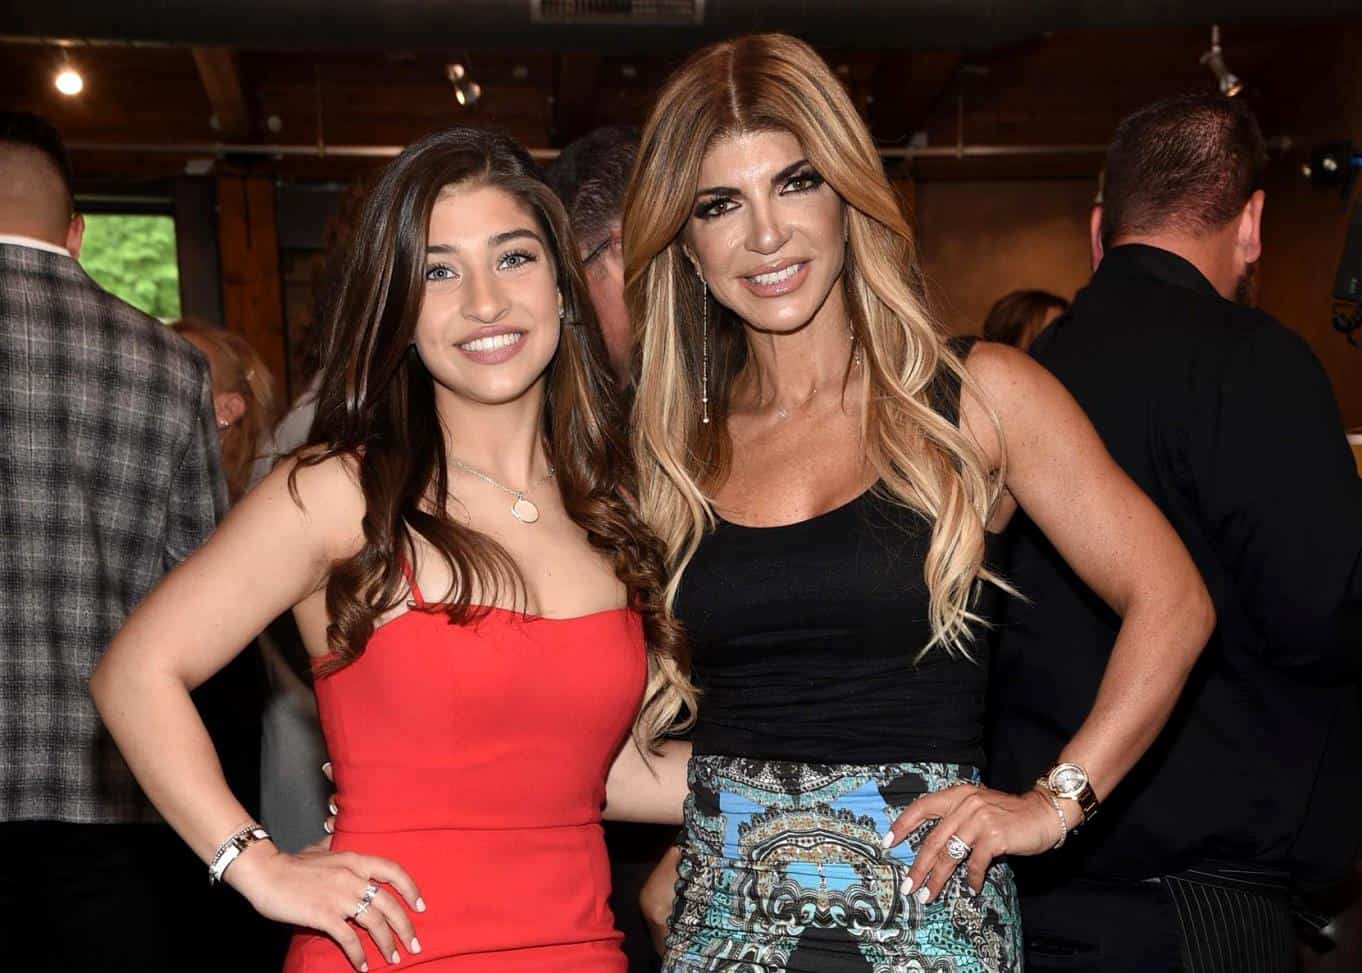 PHOTOS: See New Before and After Pictures of Gia Giudice's Nose Job as RHONJ Star's Plastic Surgeon Shows Transformation